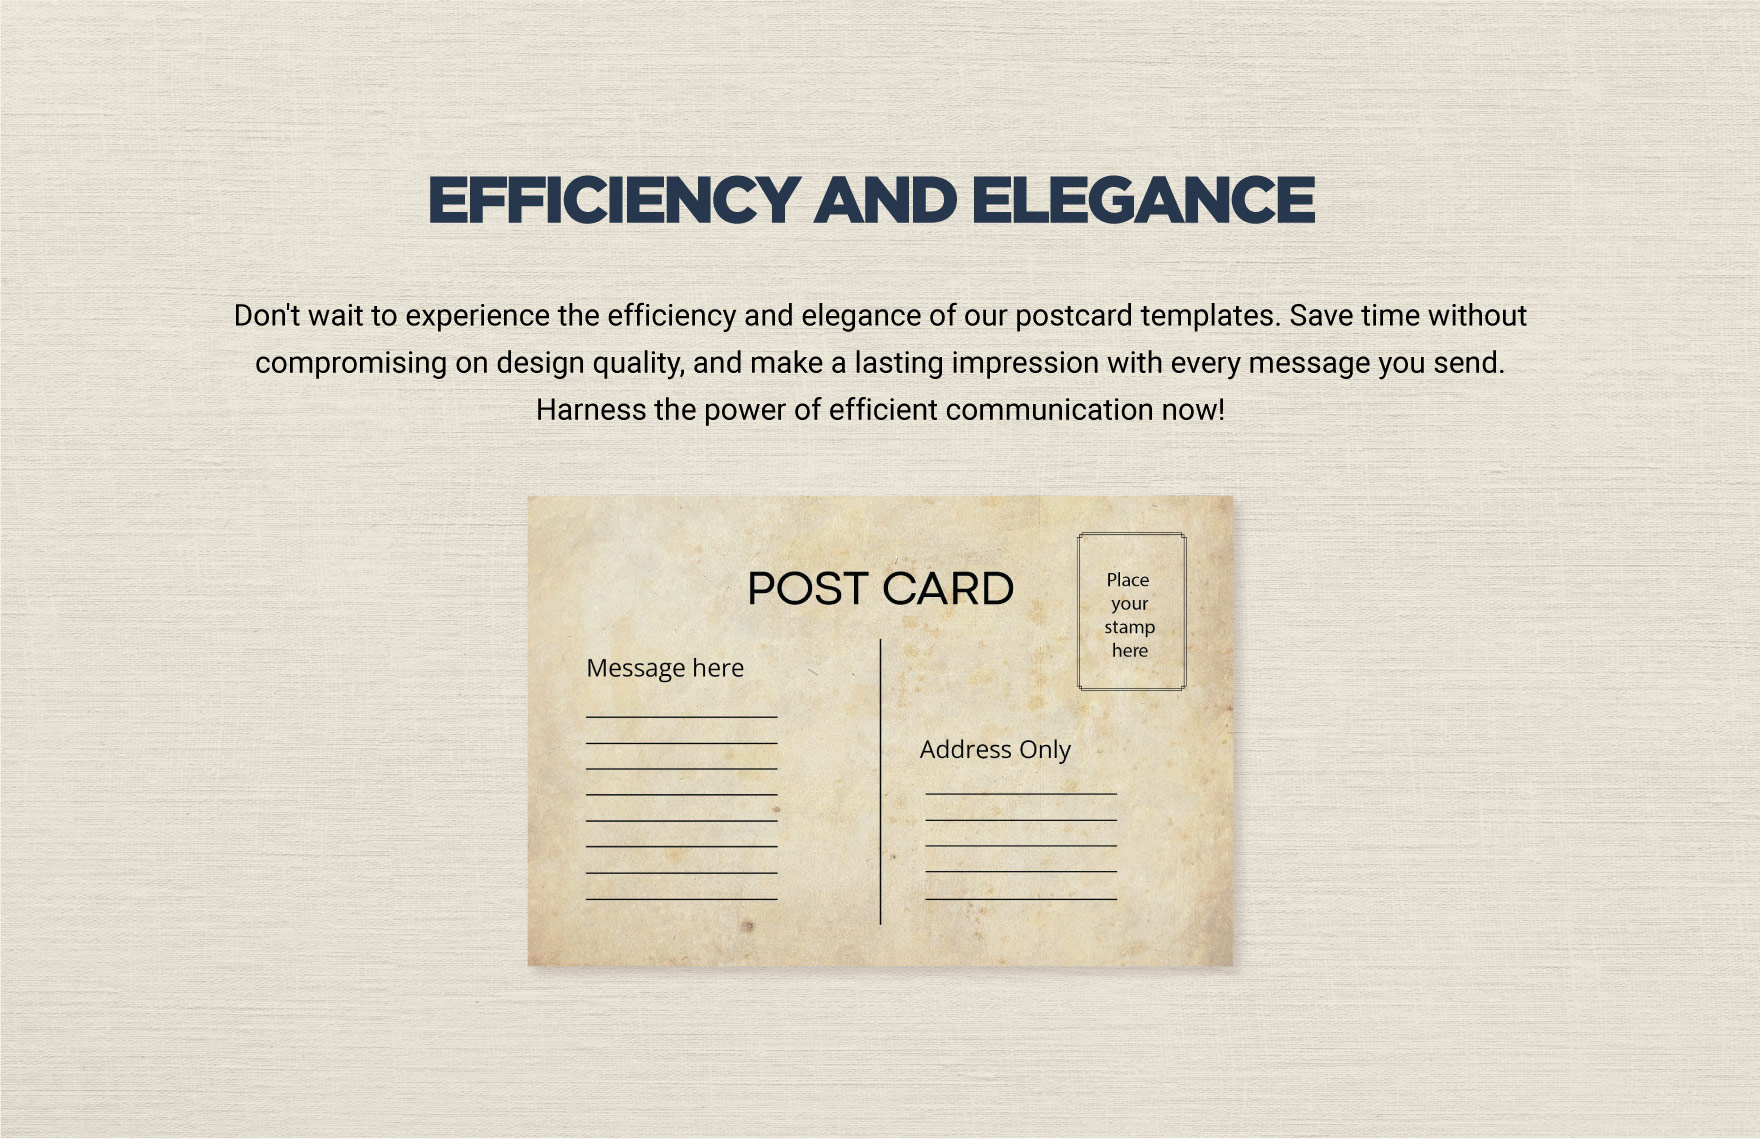 Old Postcard Template